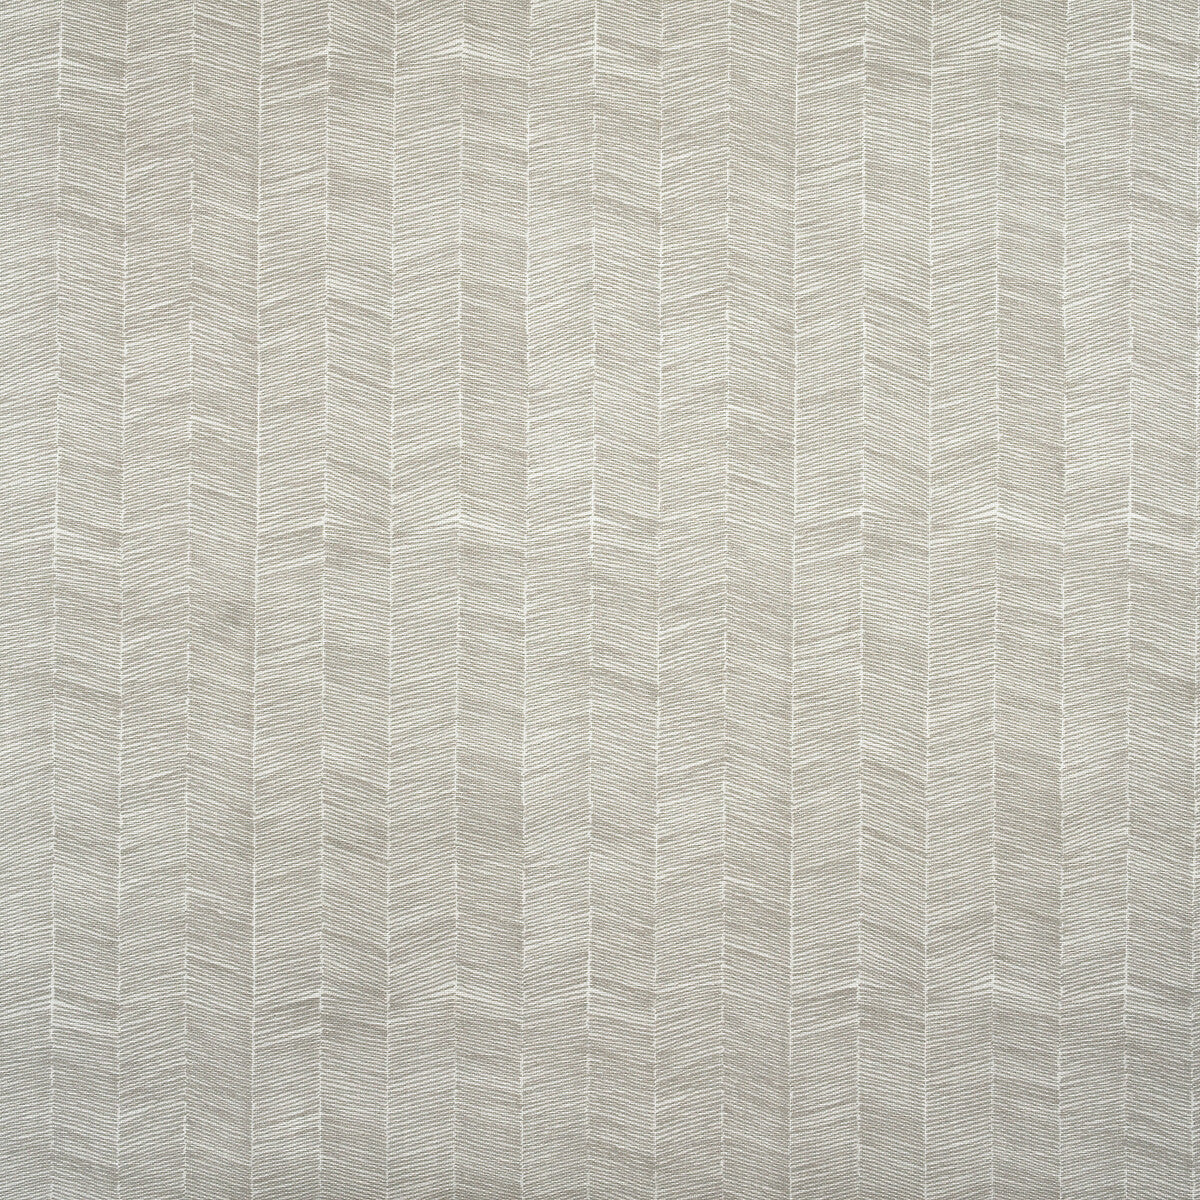 Delta Outdoor fabric in cloud color - pattern AM100347.11.0 - by Kravet Couture in the Andrew Martin The Great Outdoors collection